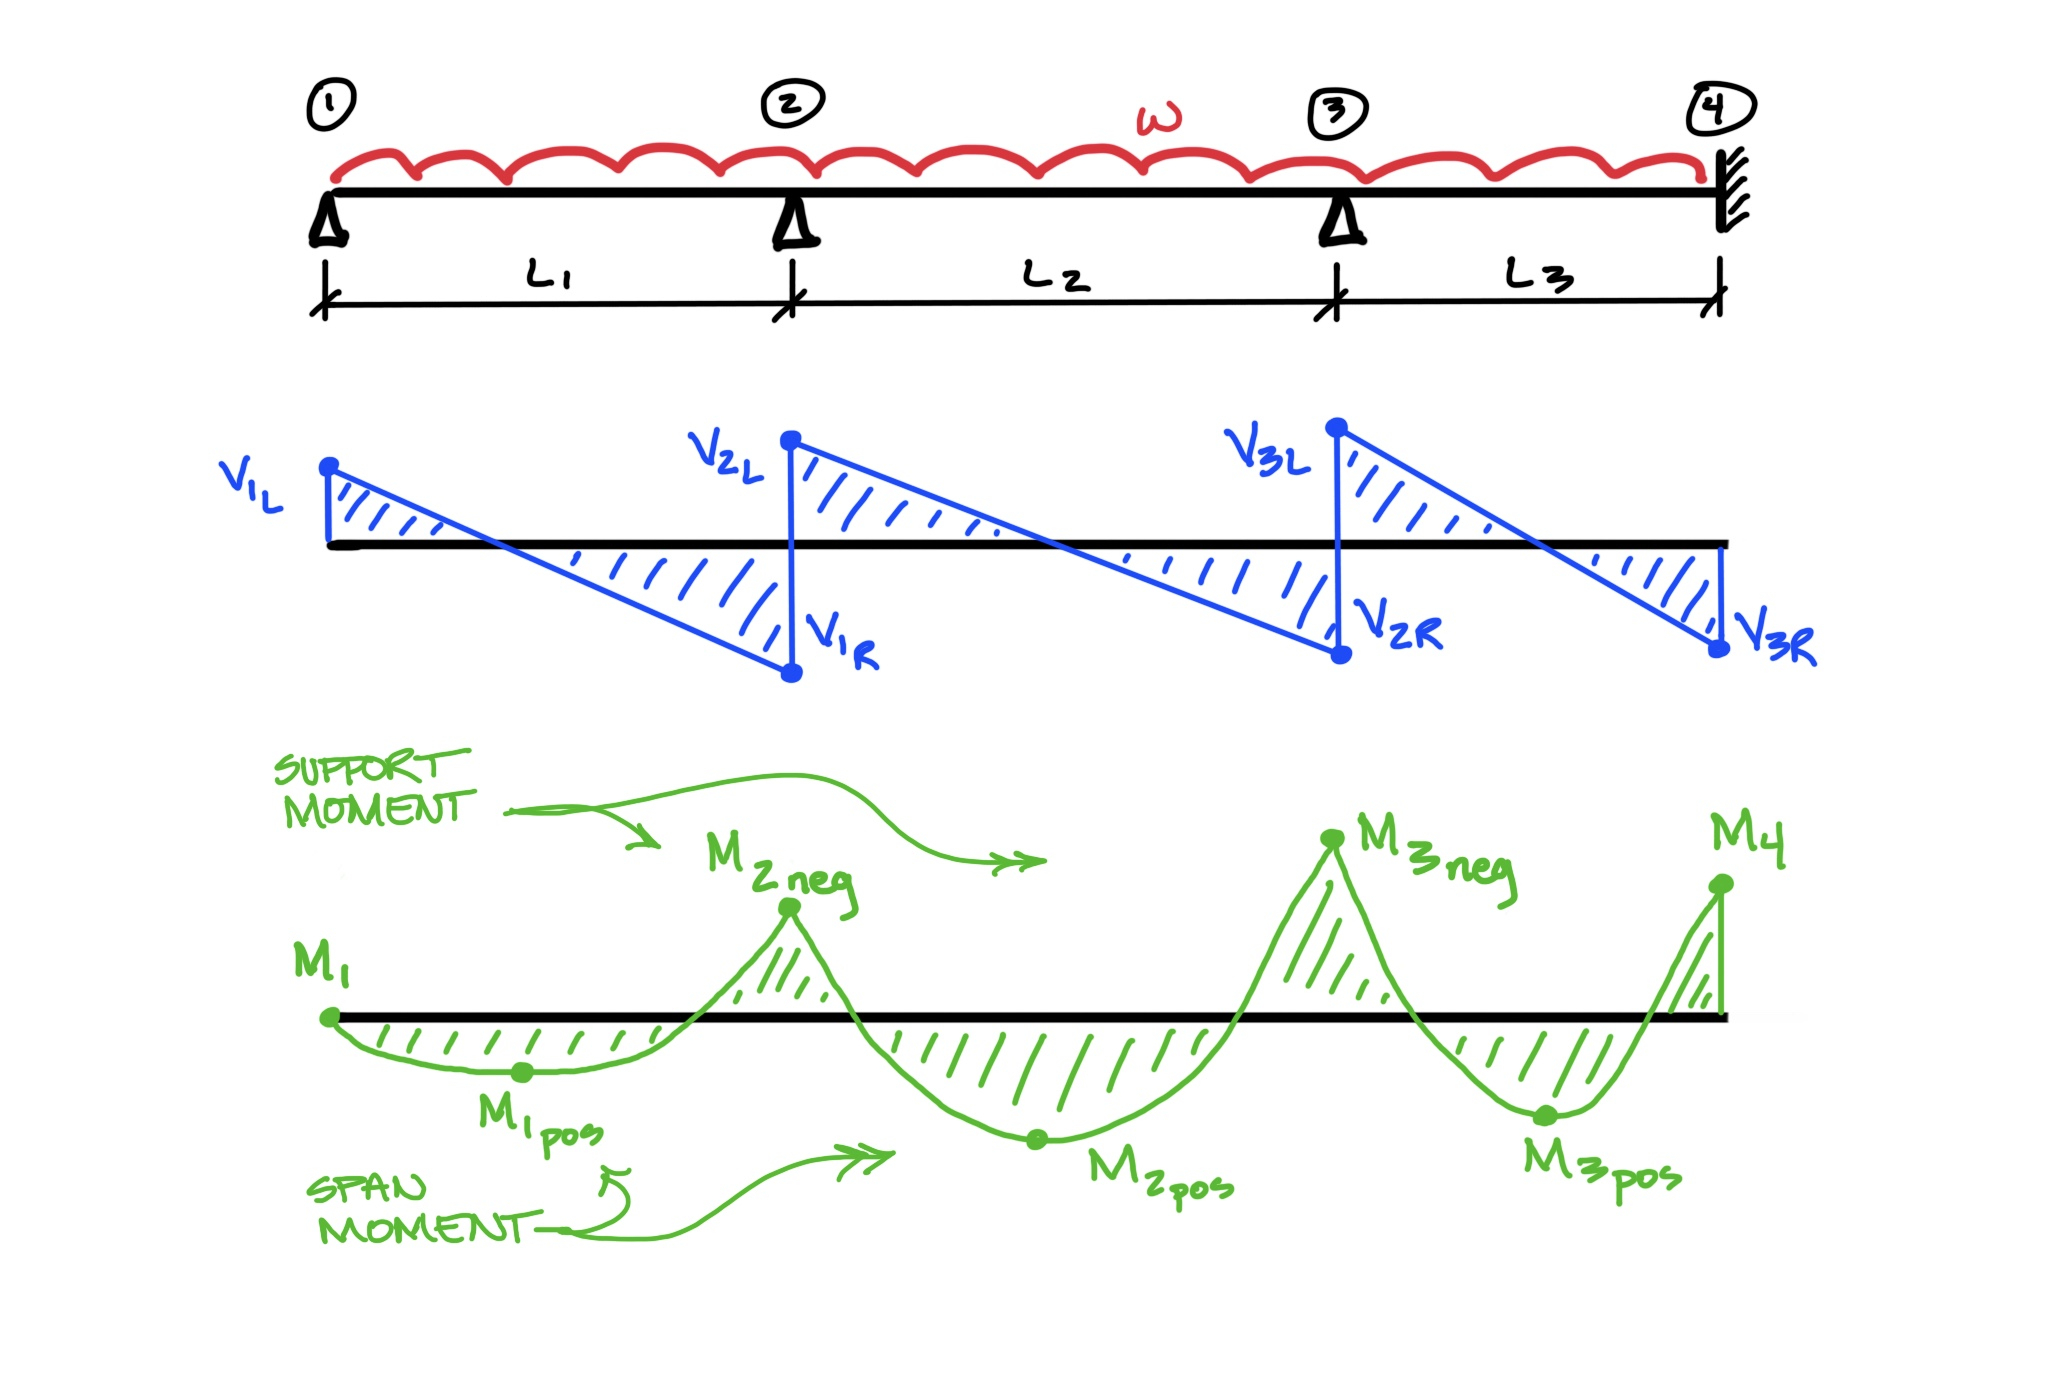 Shear Moment Diagram Structural Engineering Shear Force And Bending Moment For